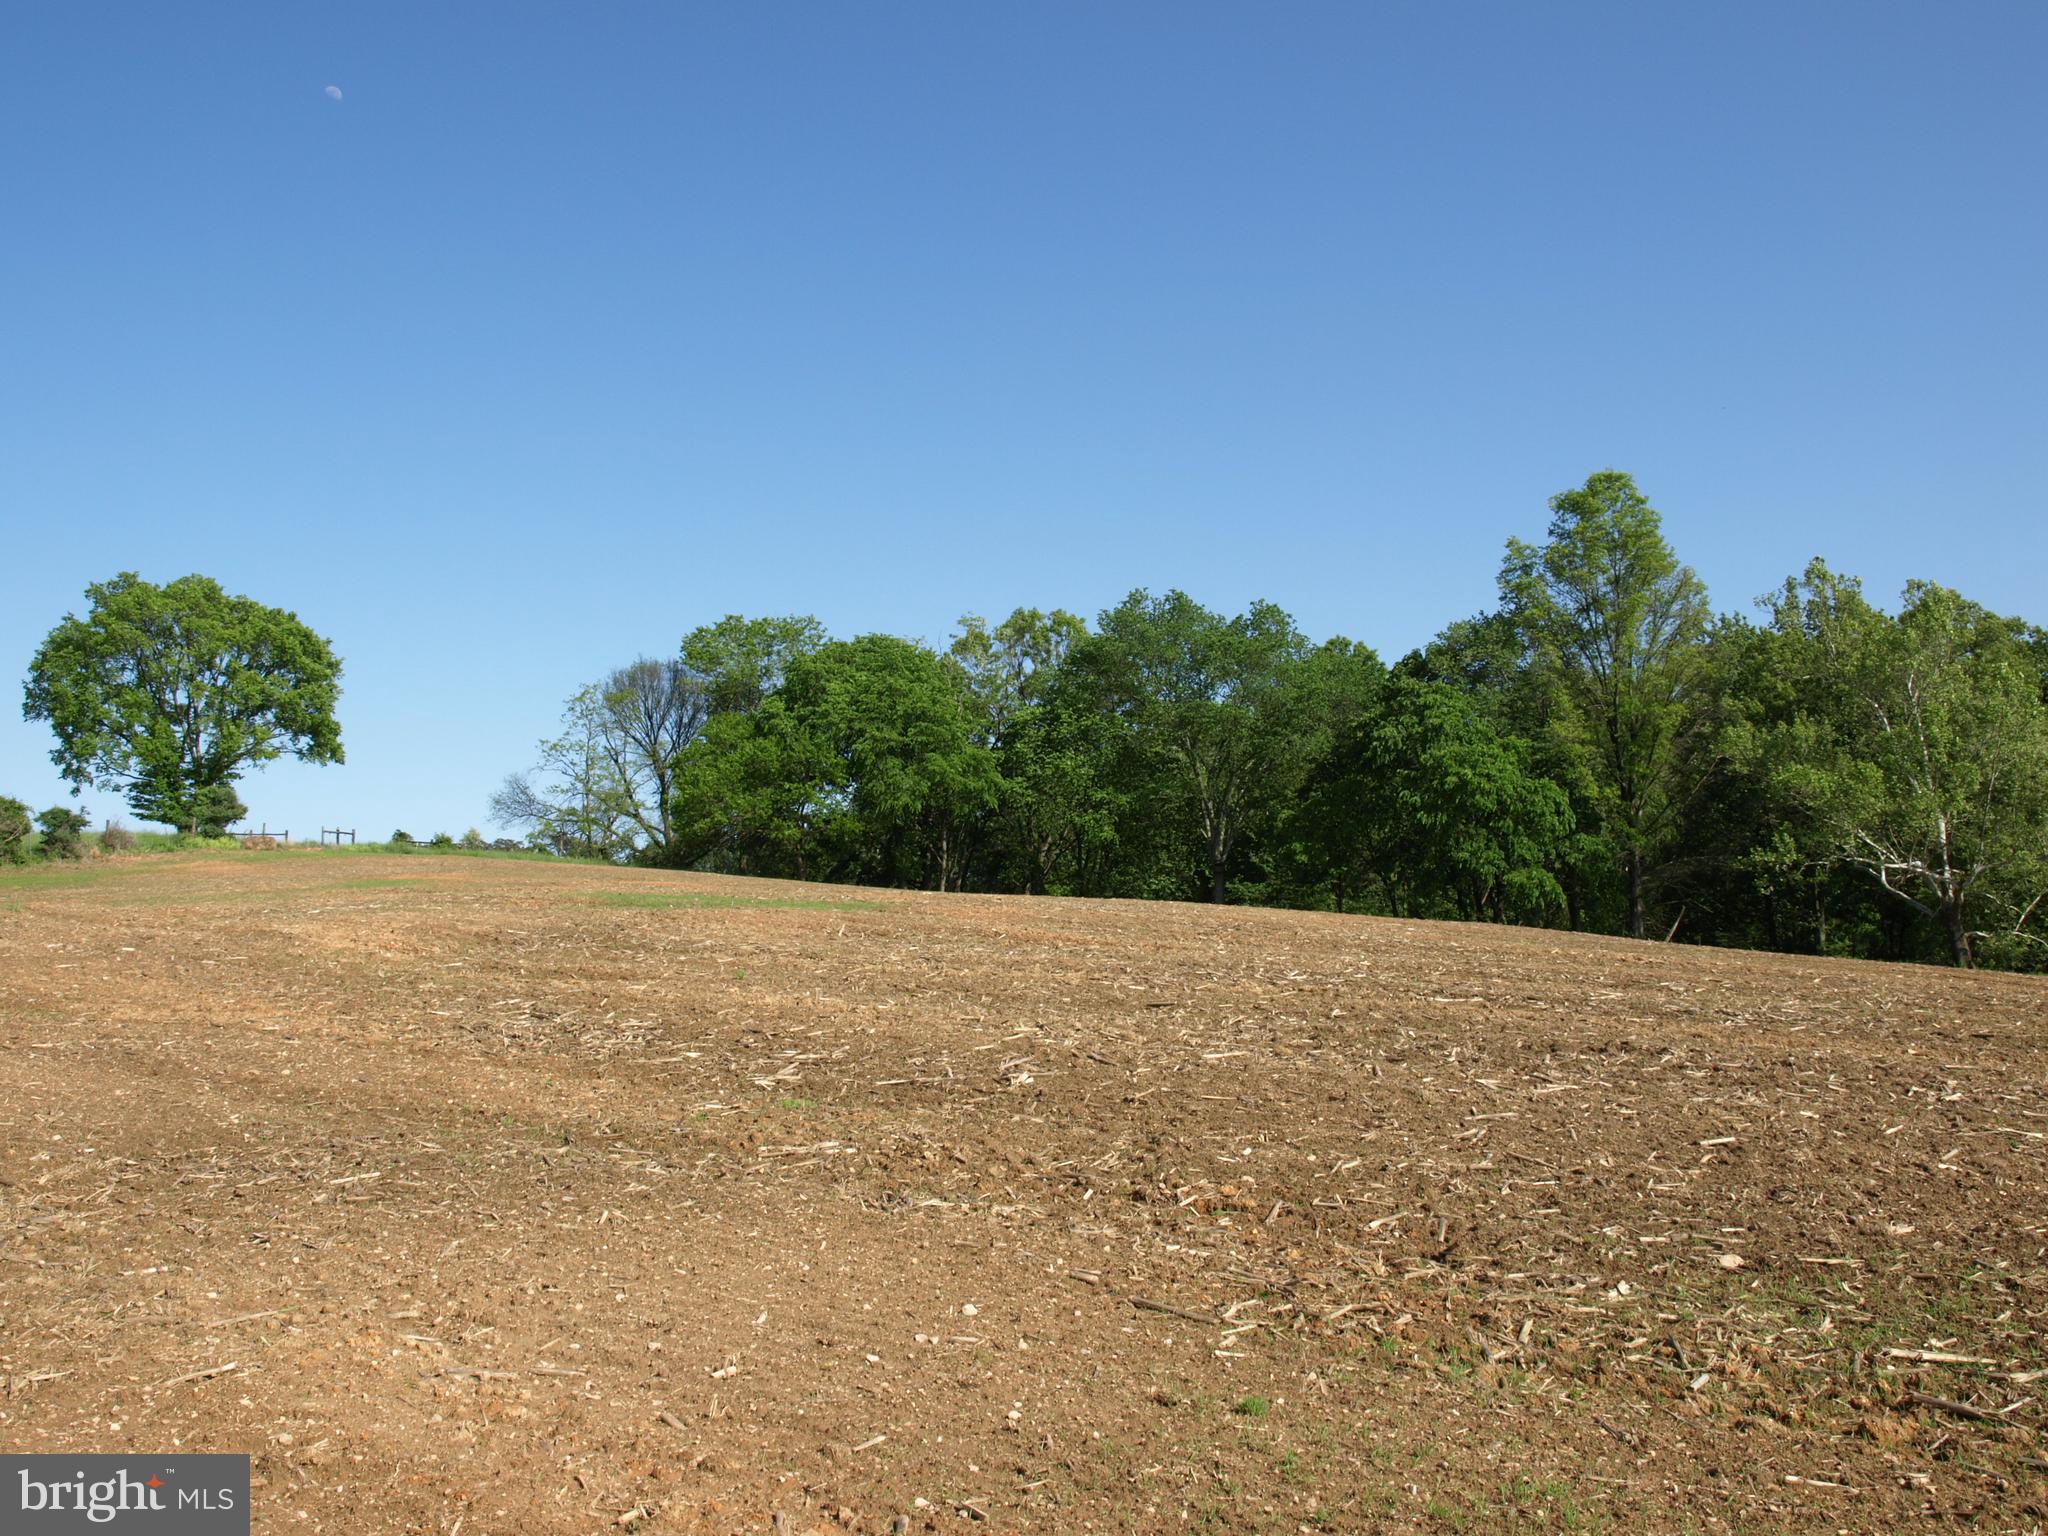 a view of a field with trees in background